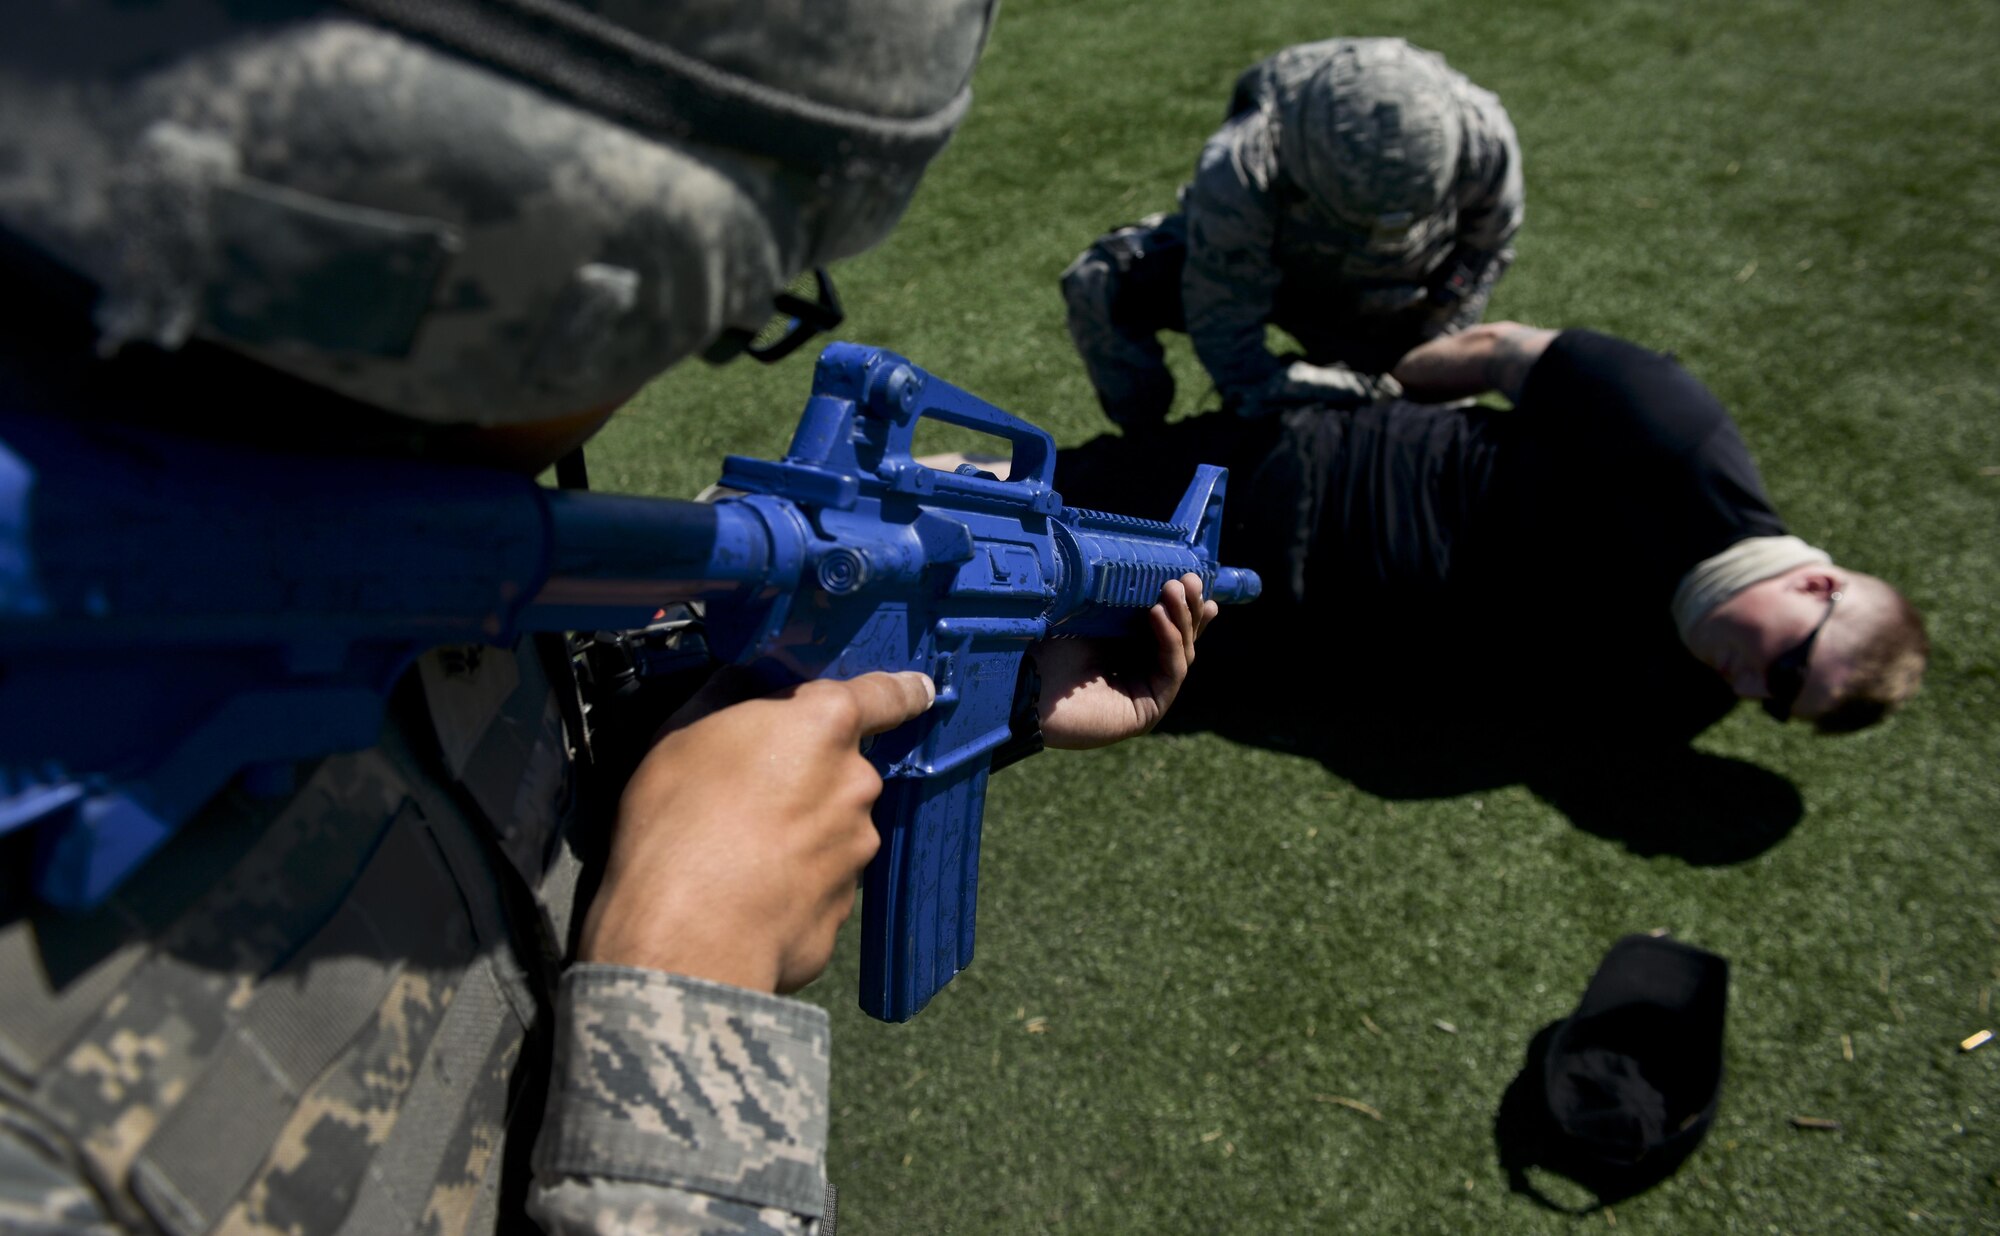 Airman 1st Class Logan Welle, 99th Security Forces Squadron, covers his wingman as he searches a simulated active shooter during a base exercise at Nellis Air Force Base, Nev., May 12, 2016. The exercise tested the readiness and procedures of the base with different sets of scenarios. (U.S. Air Force photo by Airman 1st Class Kevin Tanenbaum)